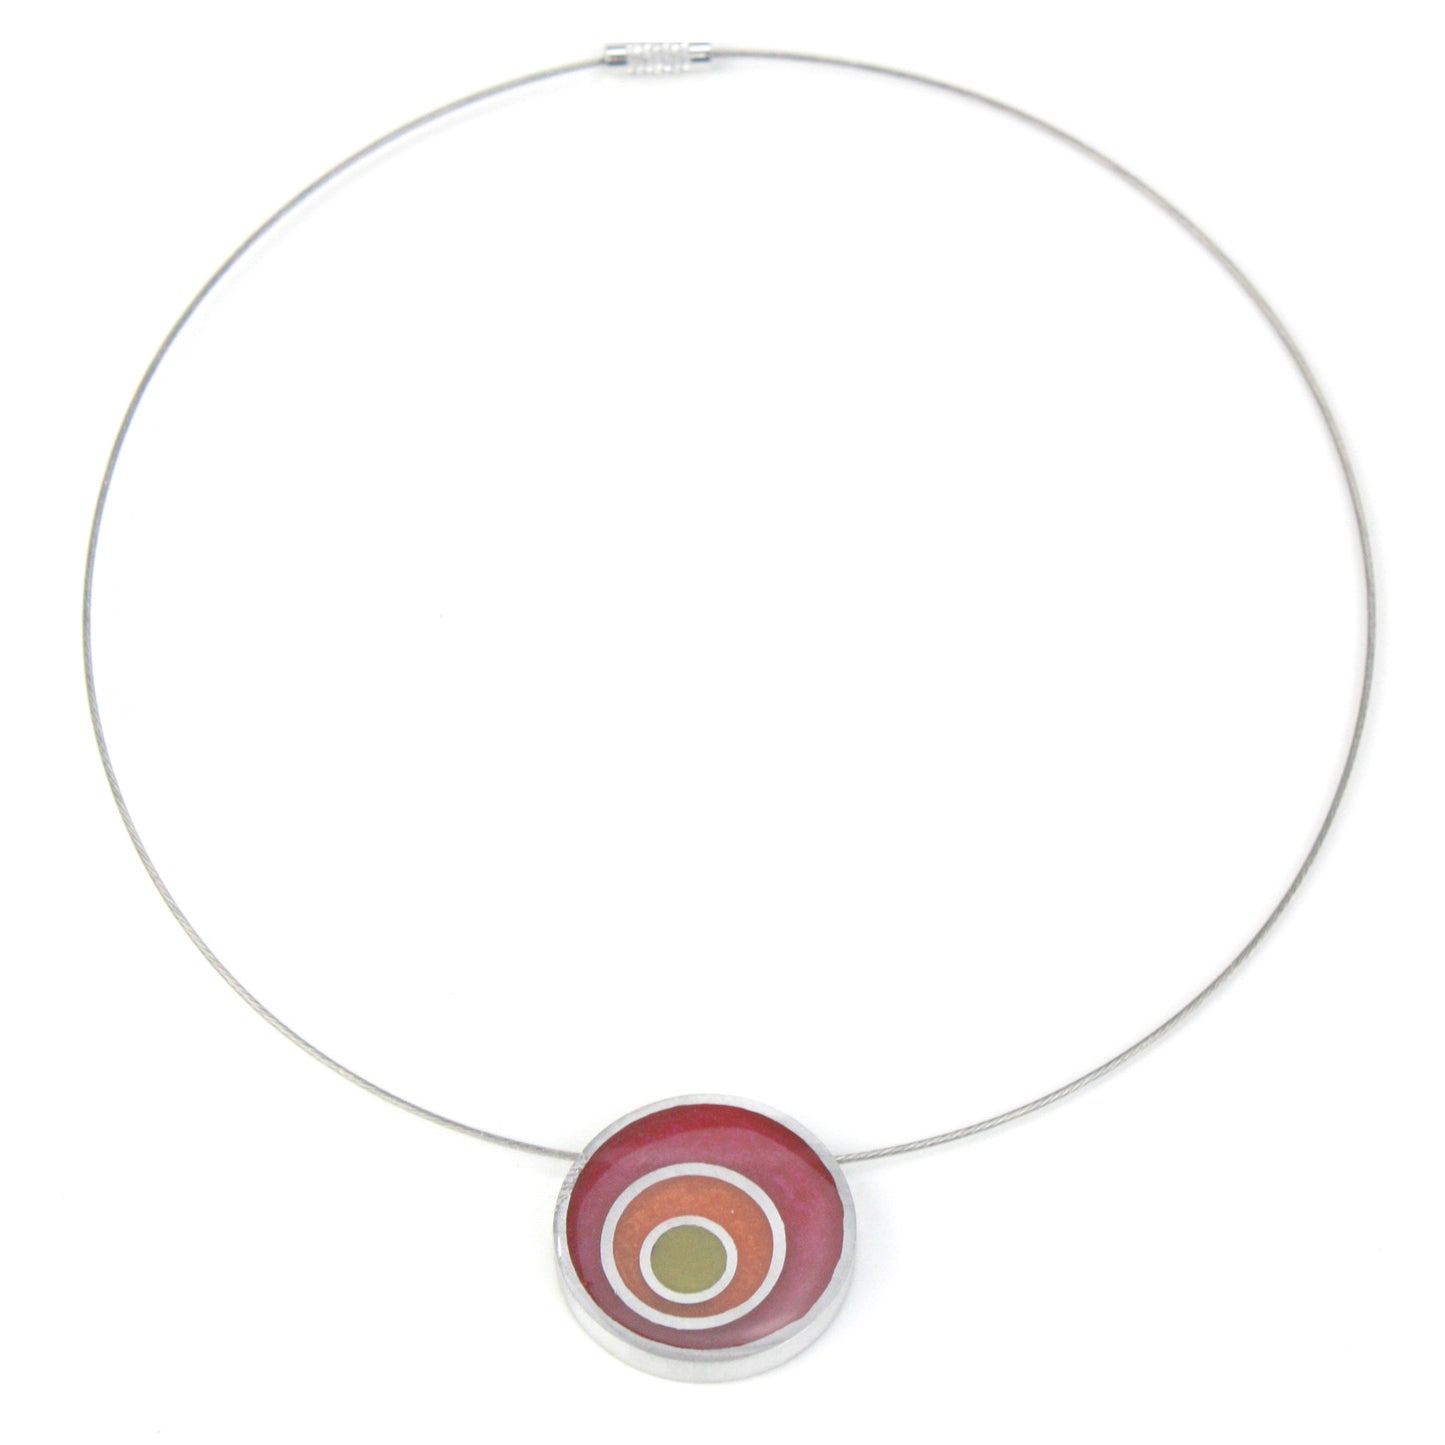 Resinique triple circle necklace - Pink, orange and yellow